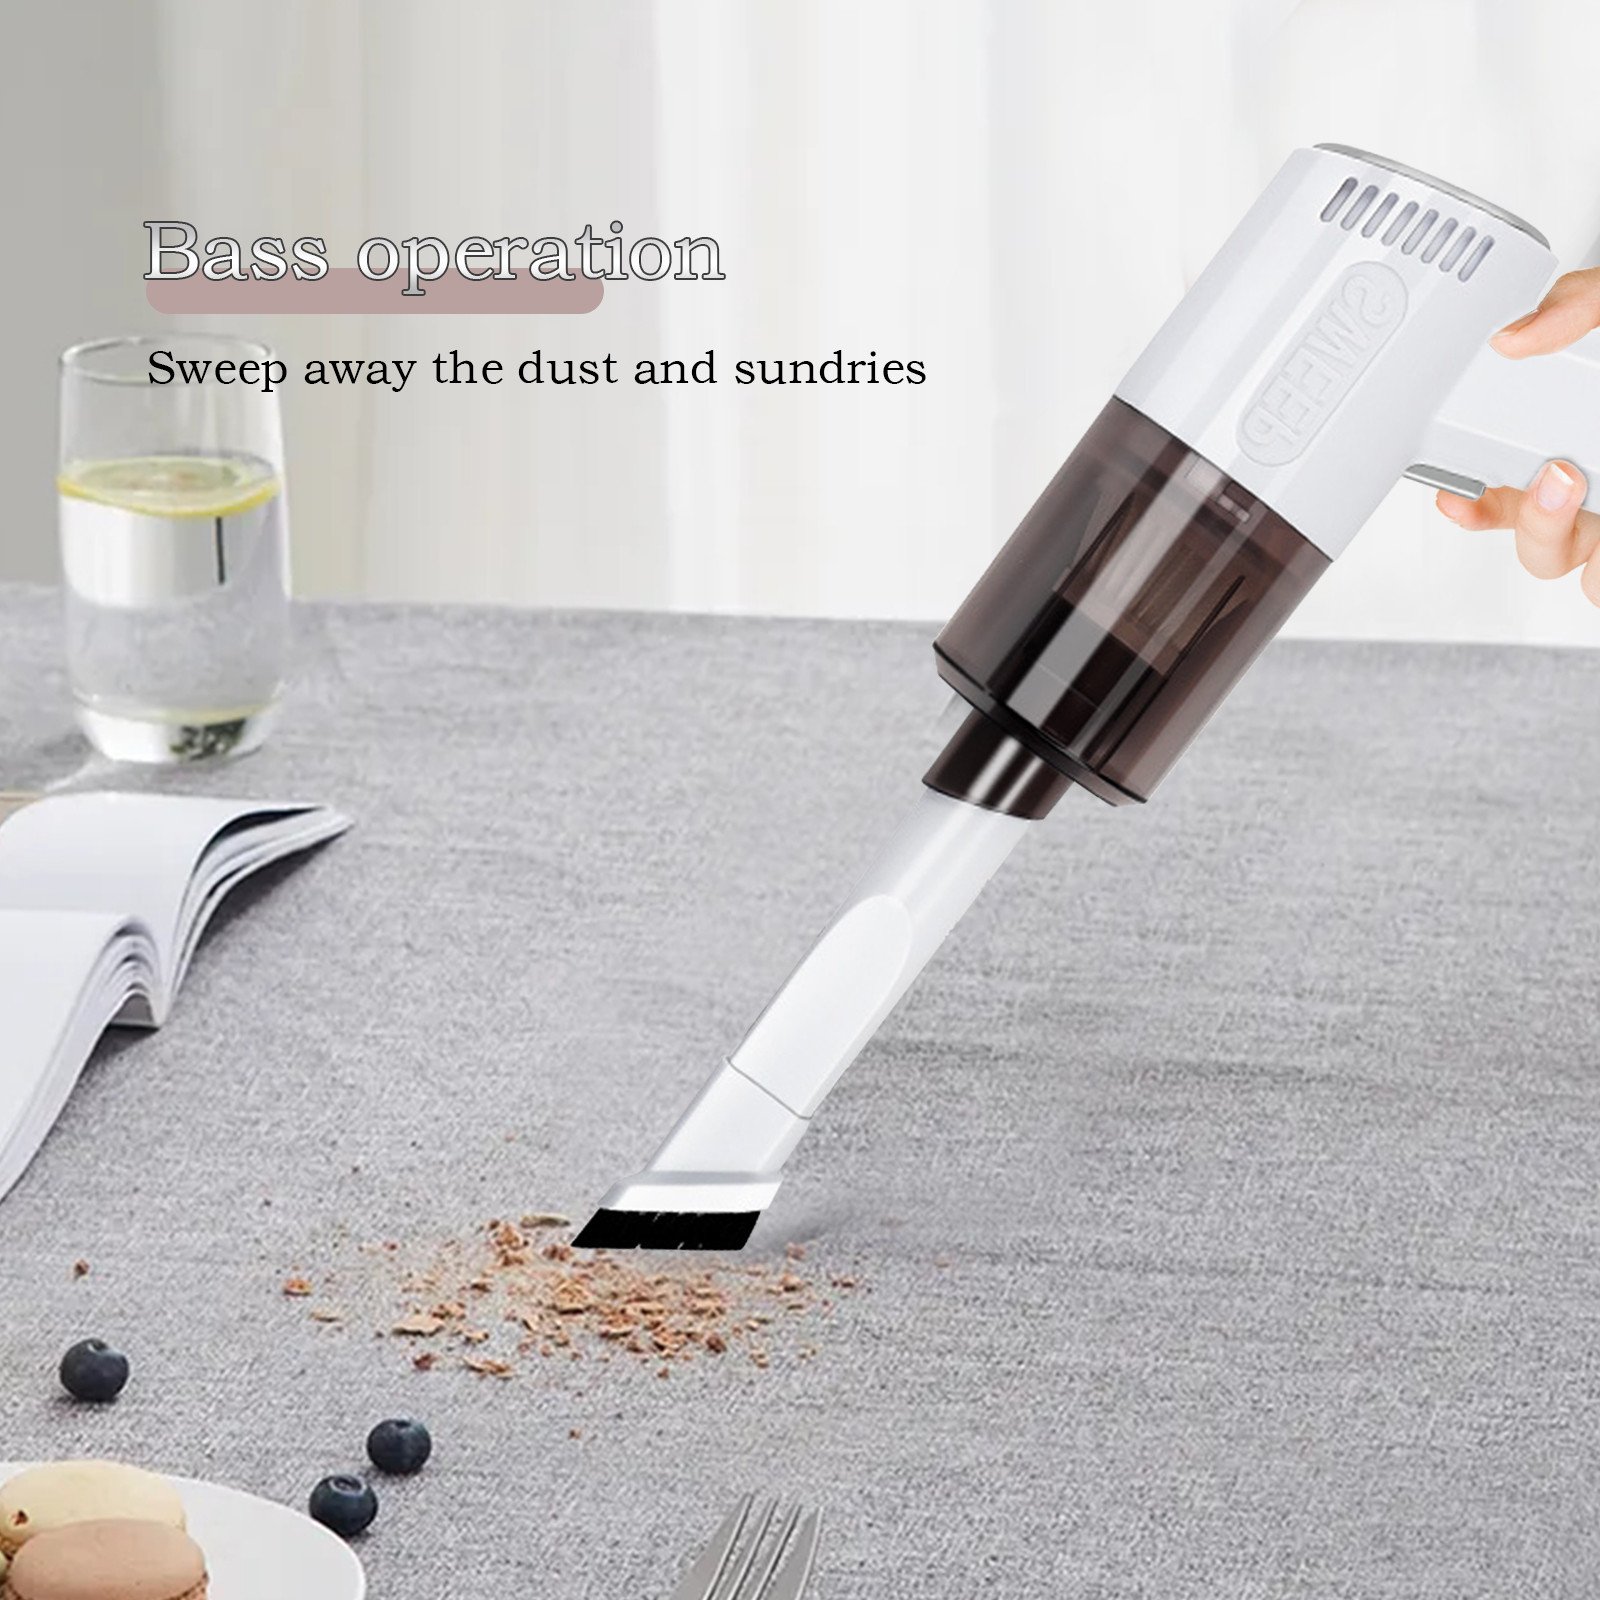 🔥Last Day Promotion 49% OFF - Wireless Handheld Vacuum Cleaner